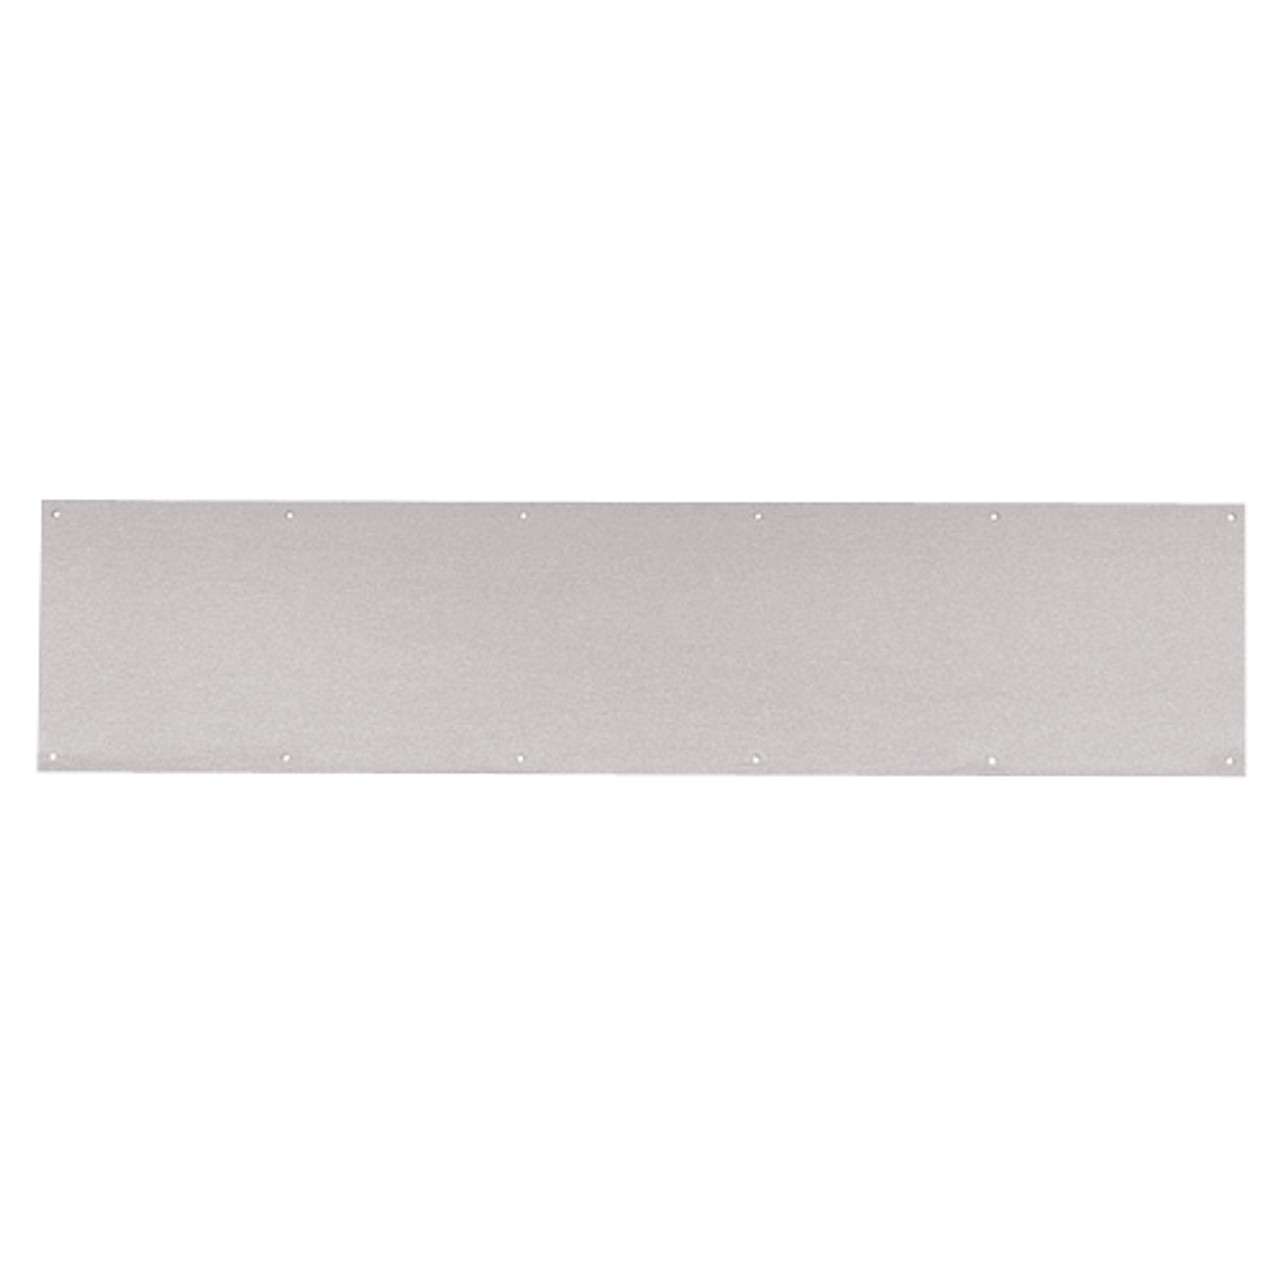 8400-US32D-16x44-B-CS Ives 8400 Series Protection Plate in Satin Stainless Steel